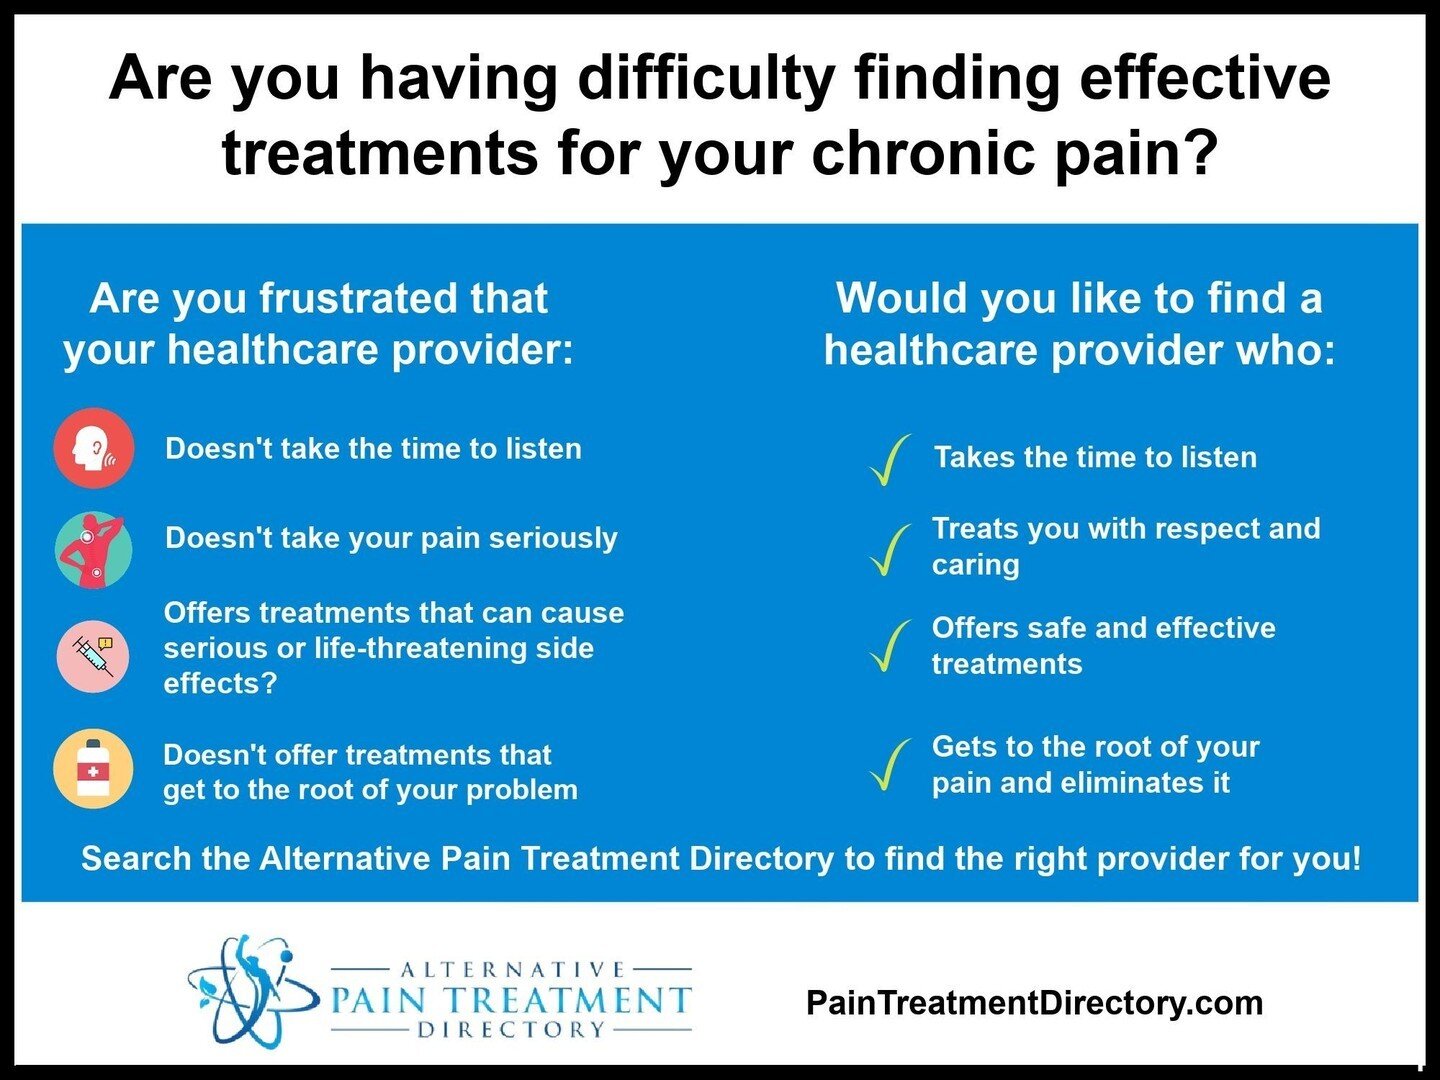 Find alternative healthcare practitioners who can help with pain here: https://buff.ly/39w3VPs
--
#painrelief #pain #holistichealth #painreliefoptions #chronicpain